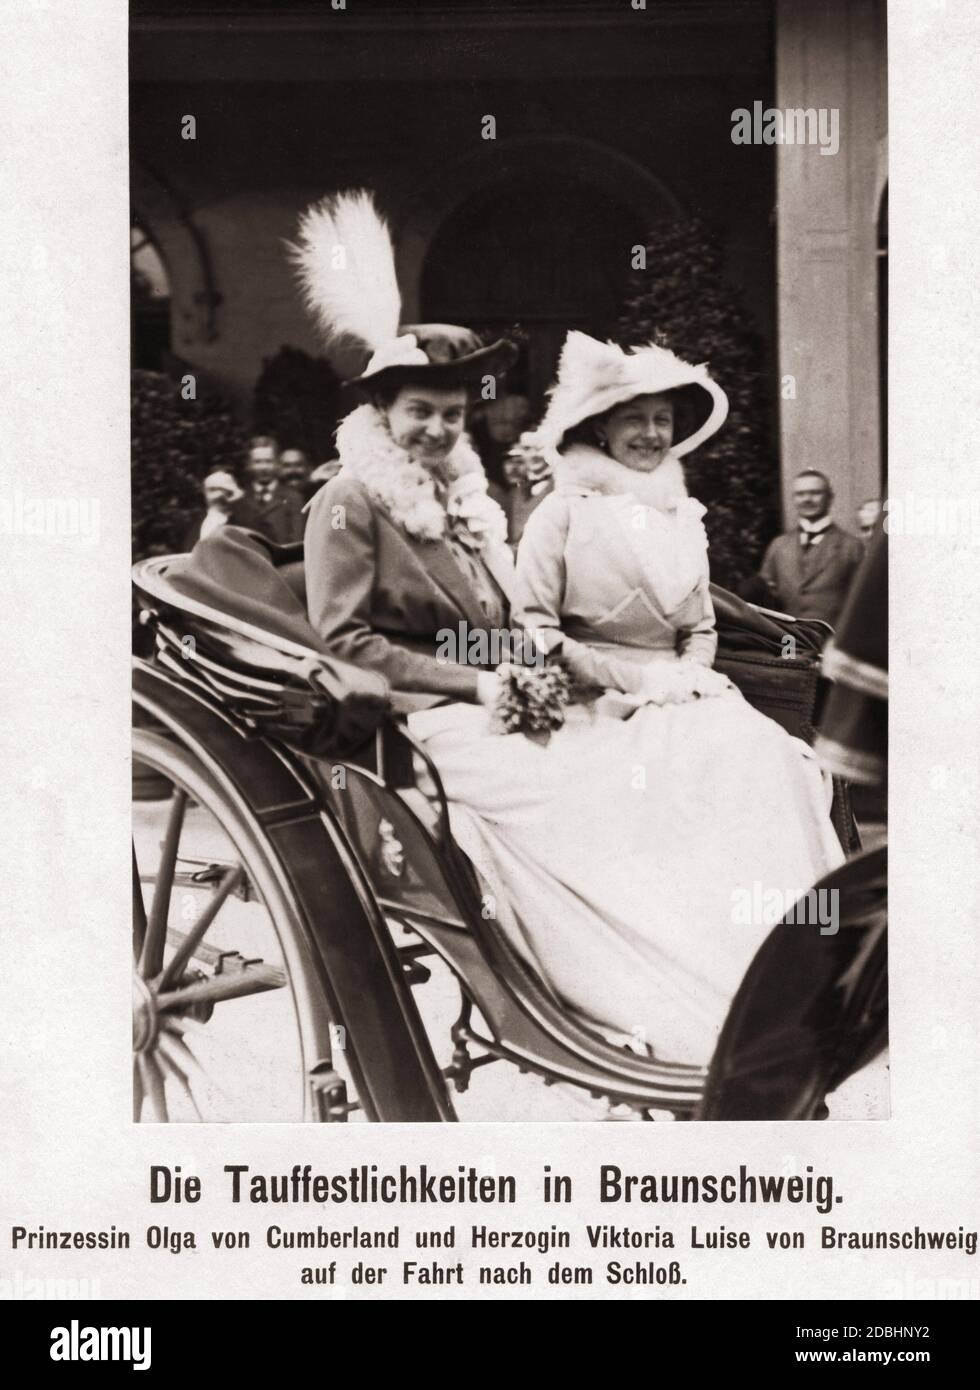 Hereditary Prince Ernst August of Hannover was baptized on May 9, 1914. The photo shows Olga of Hanover and Cumberland (left) together with Victoria Louise Duchess of Brunswick-Lueneburg (born of Prussia, mother of Ernst August, right) on a carriage ride to the castle in Brunswick. Stock Photo